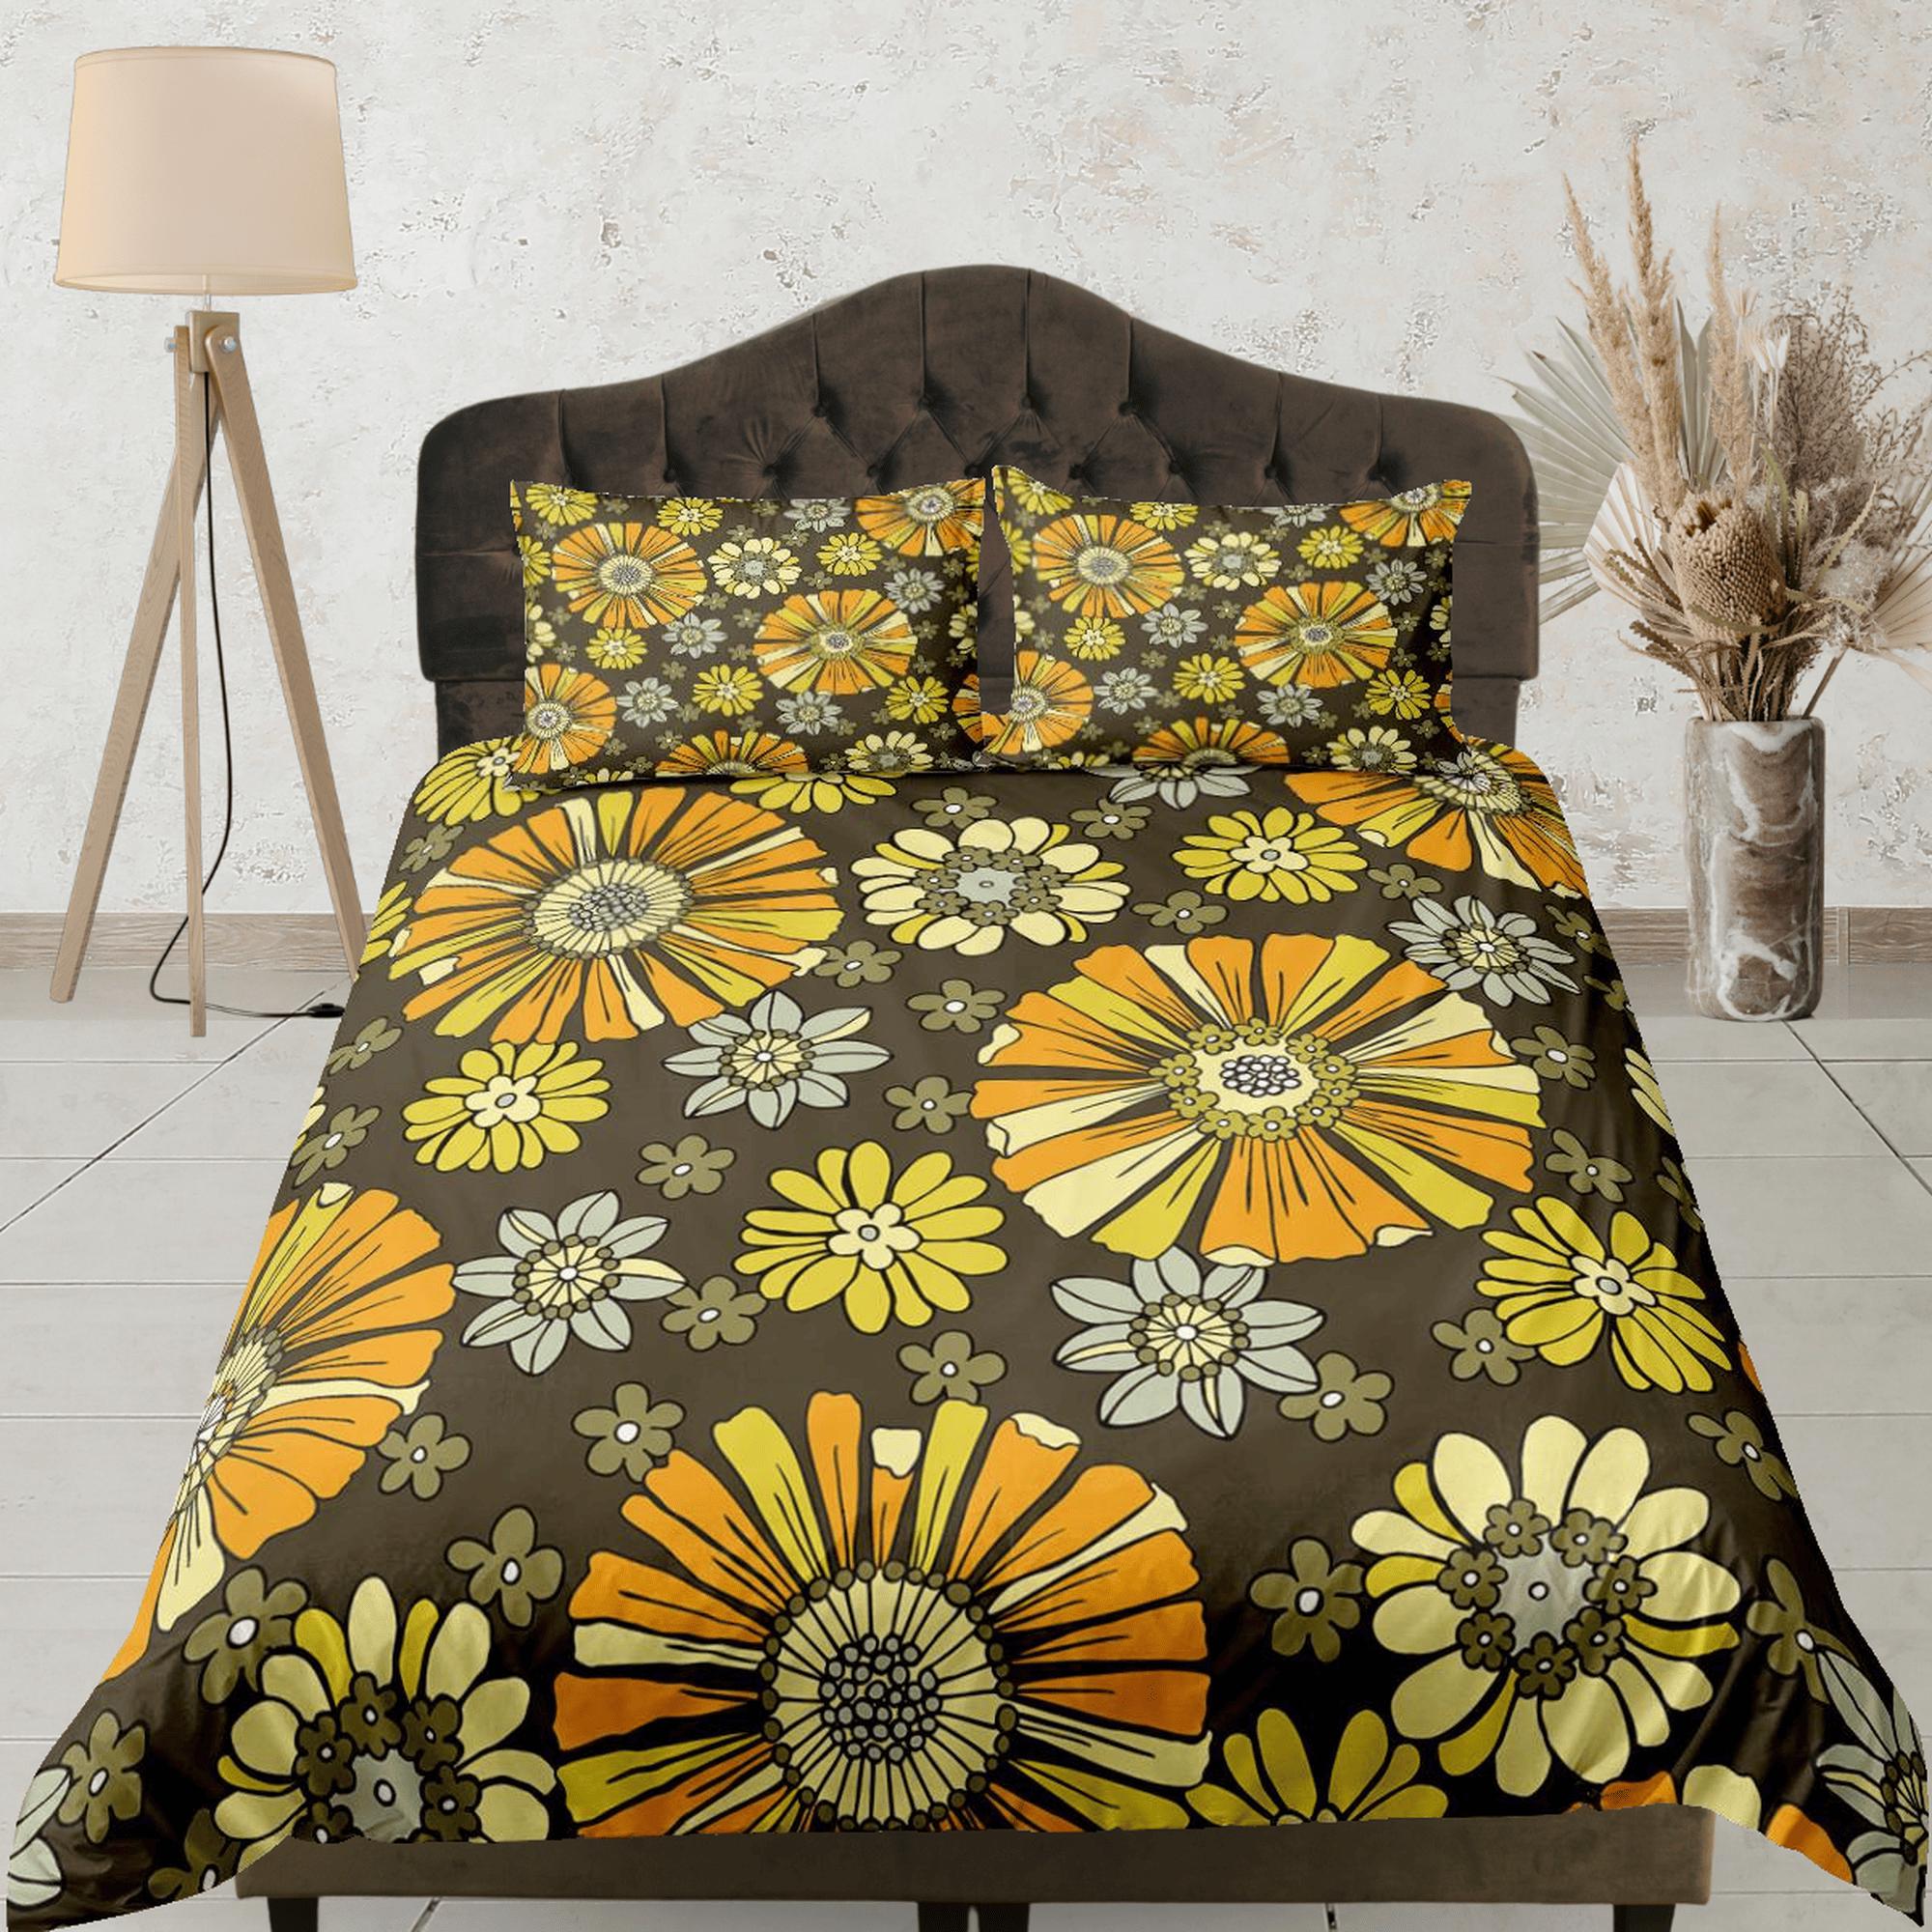 daintyduvet Mid century modern bedding brown floral duvet cover colorful retro bedding, vintage style boho chic bedspread aesthetic bedding daisy